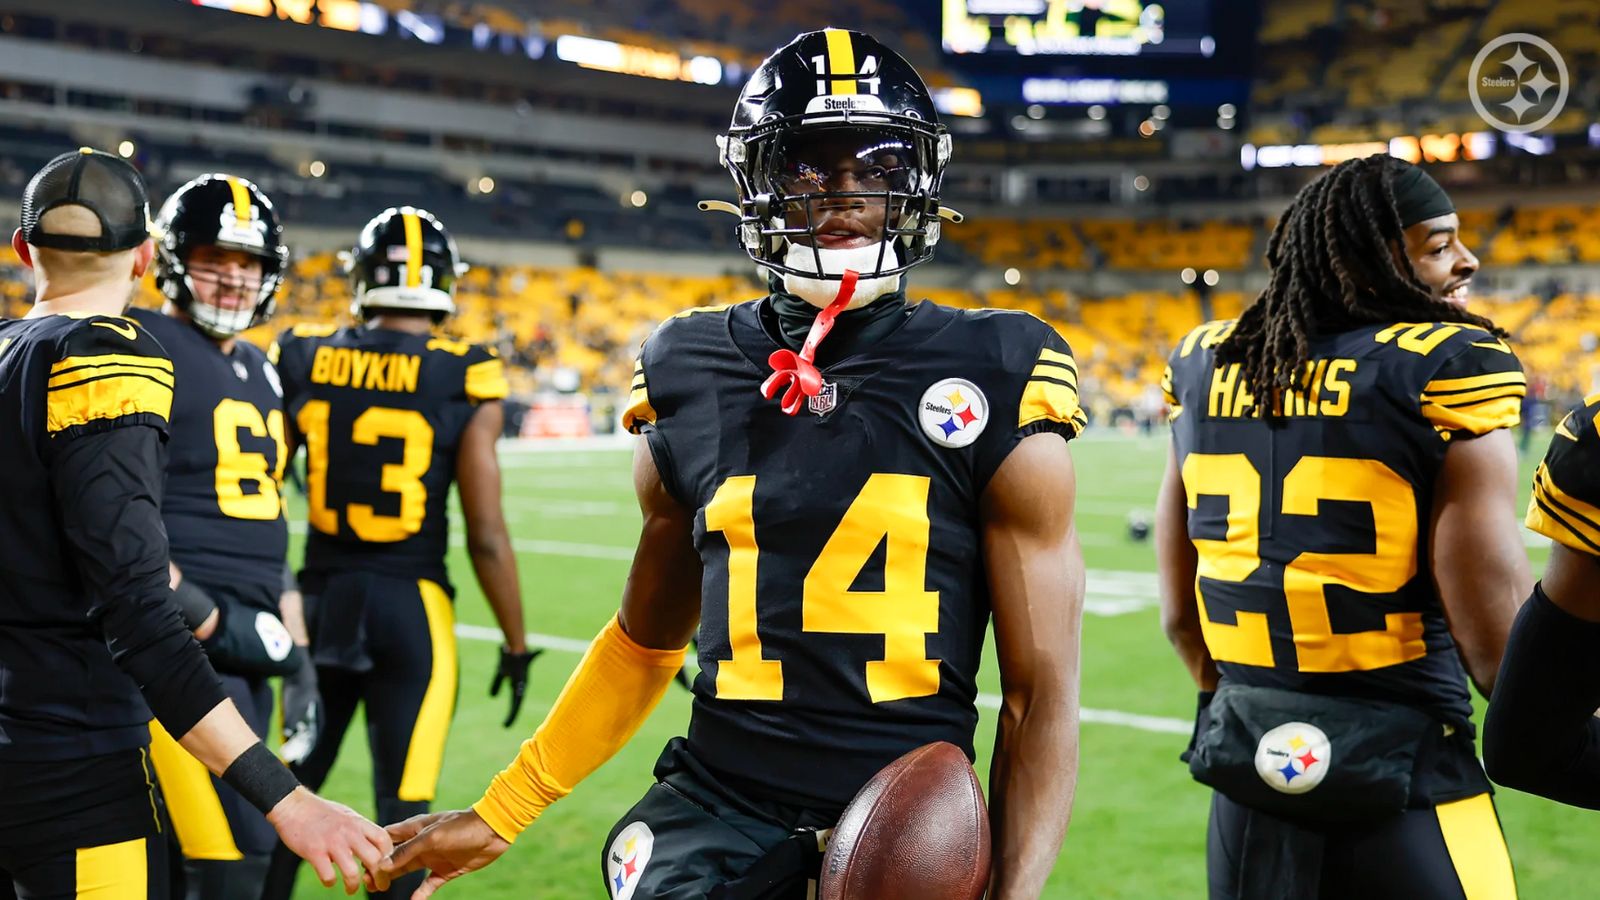 Former Steelers WR Out for Second Straight Game